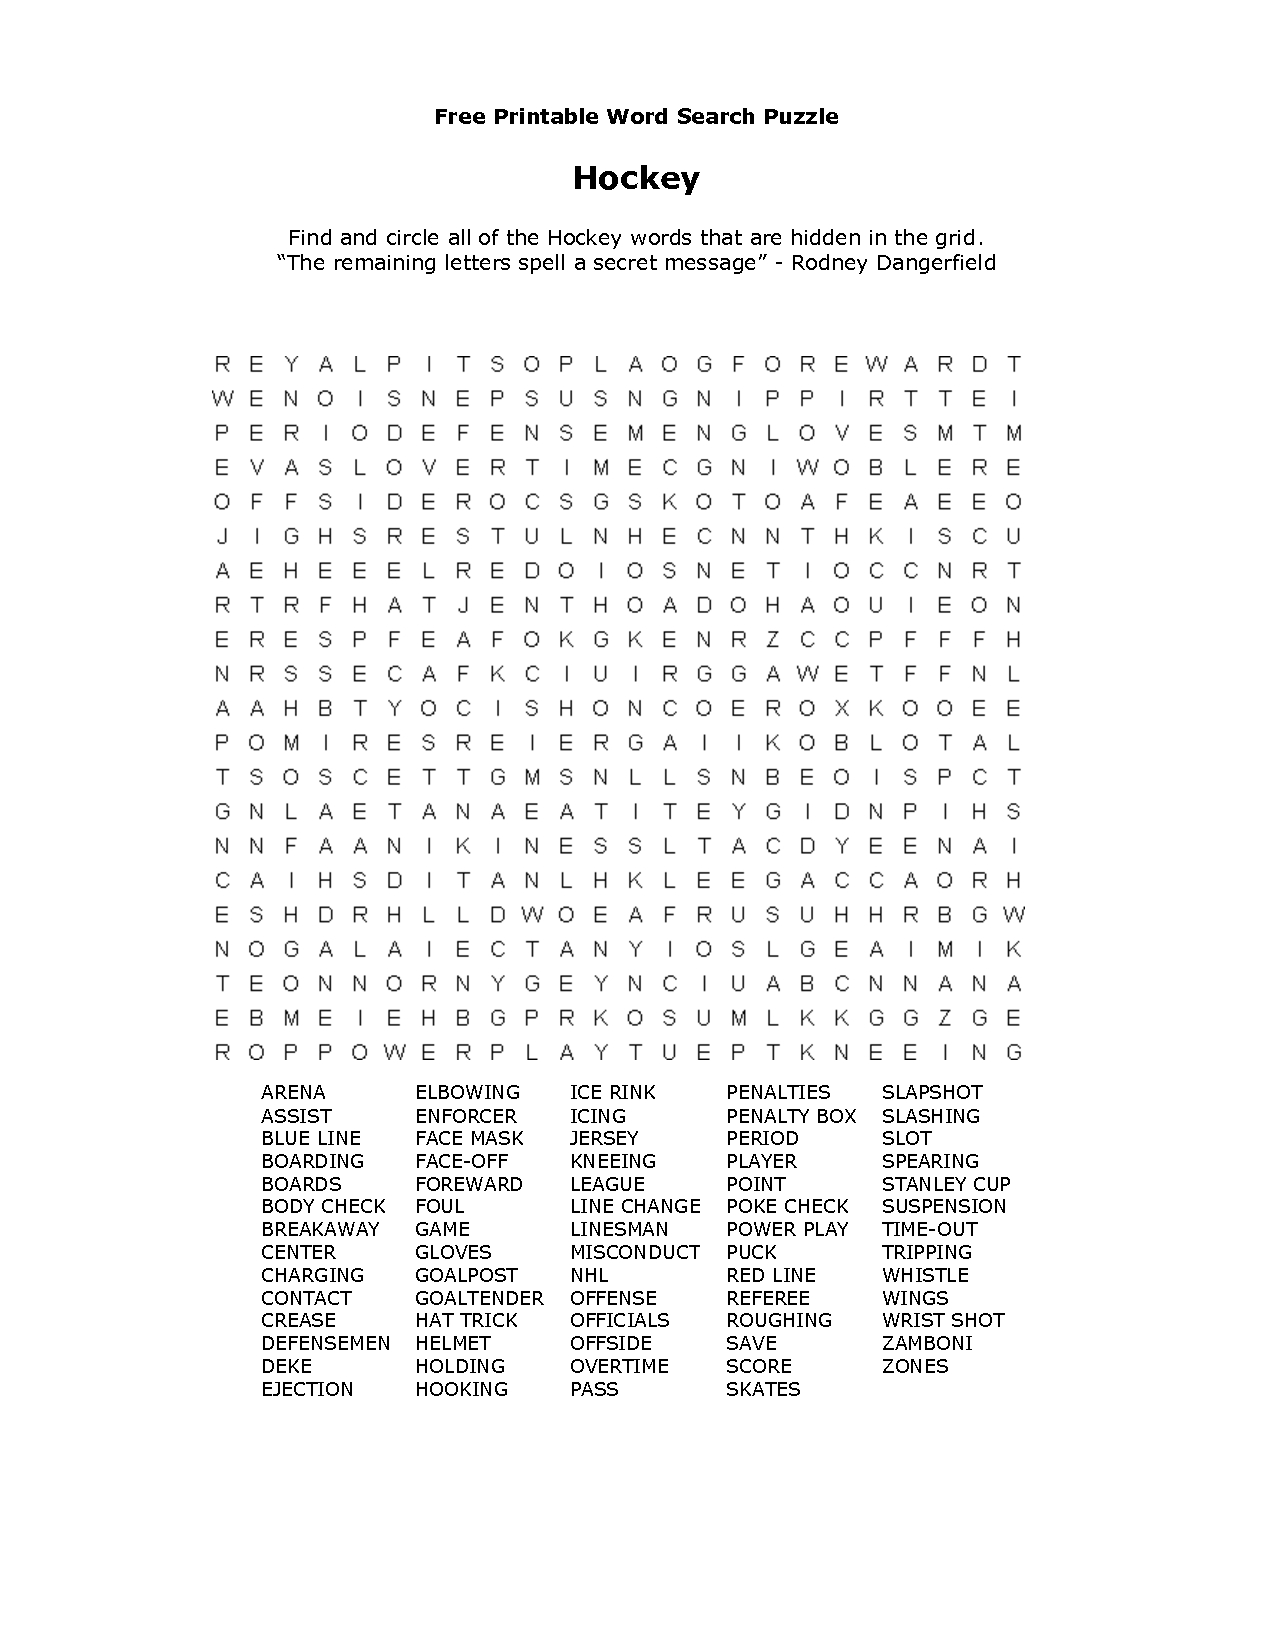 free-printable-word-search-puzzles-free-printable